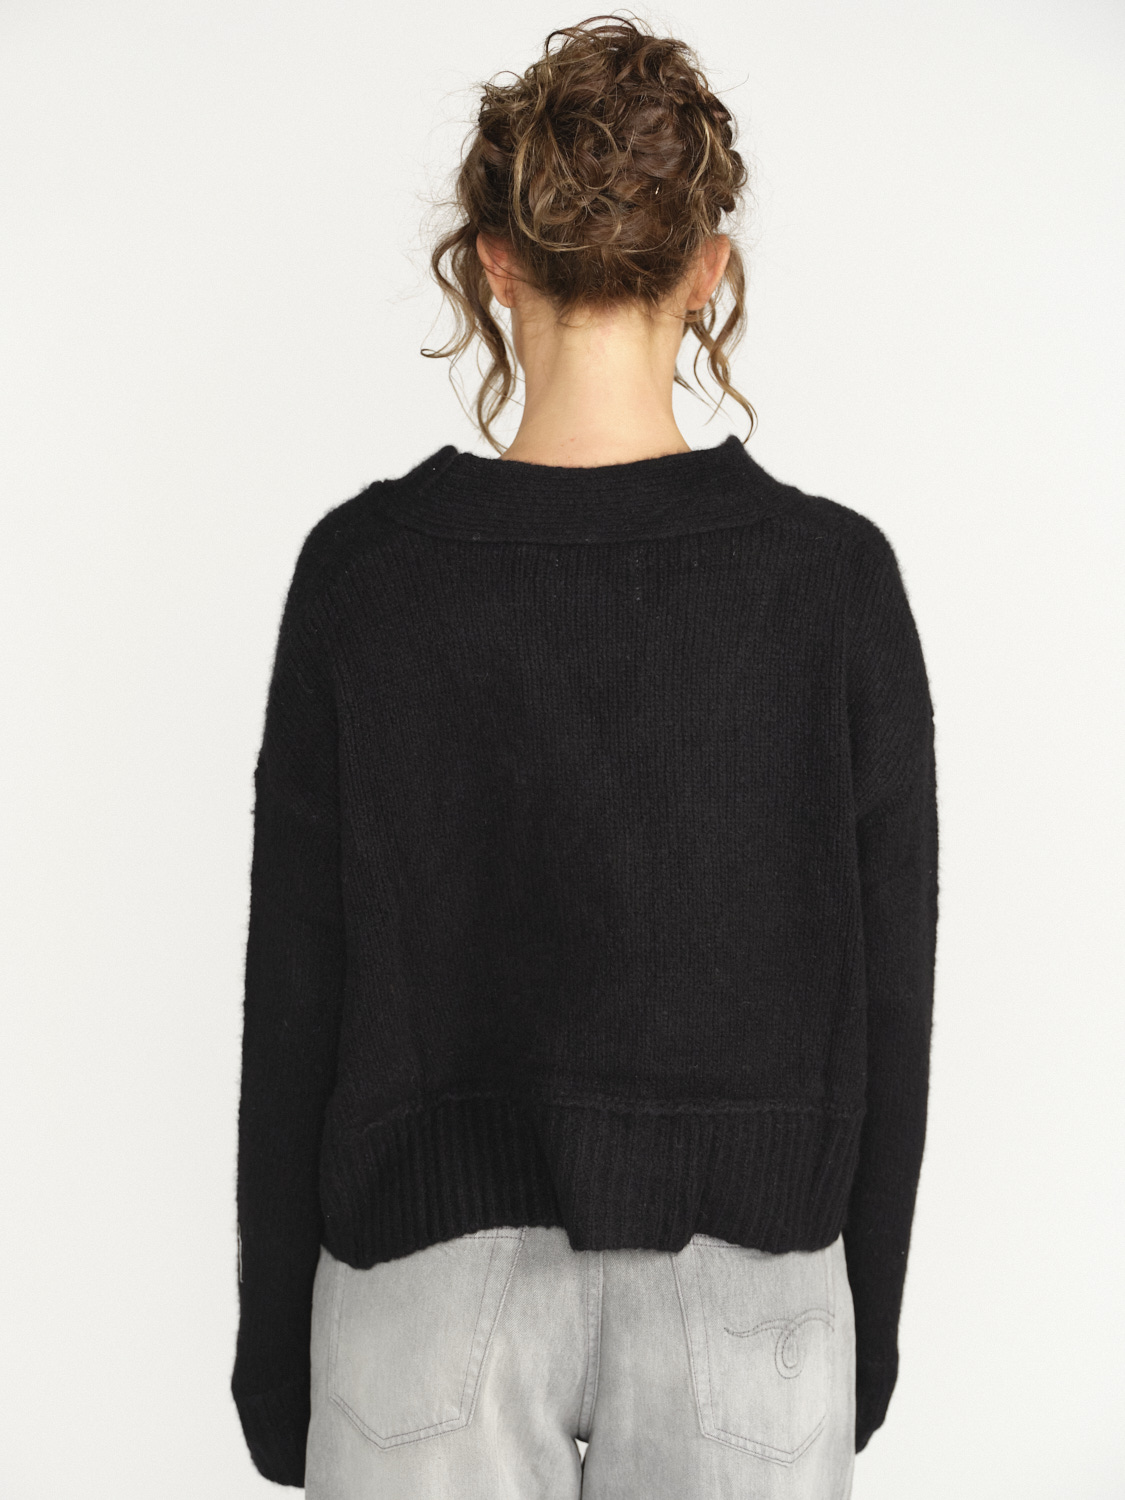 LU Ren Riely D. - Oversized cardigan with button placket black XS